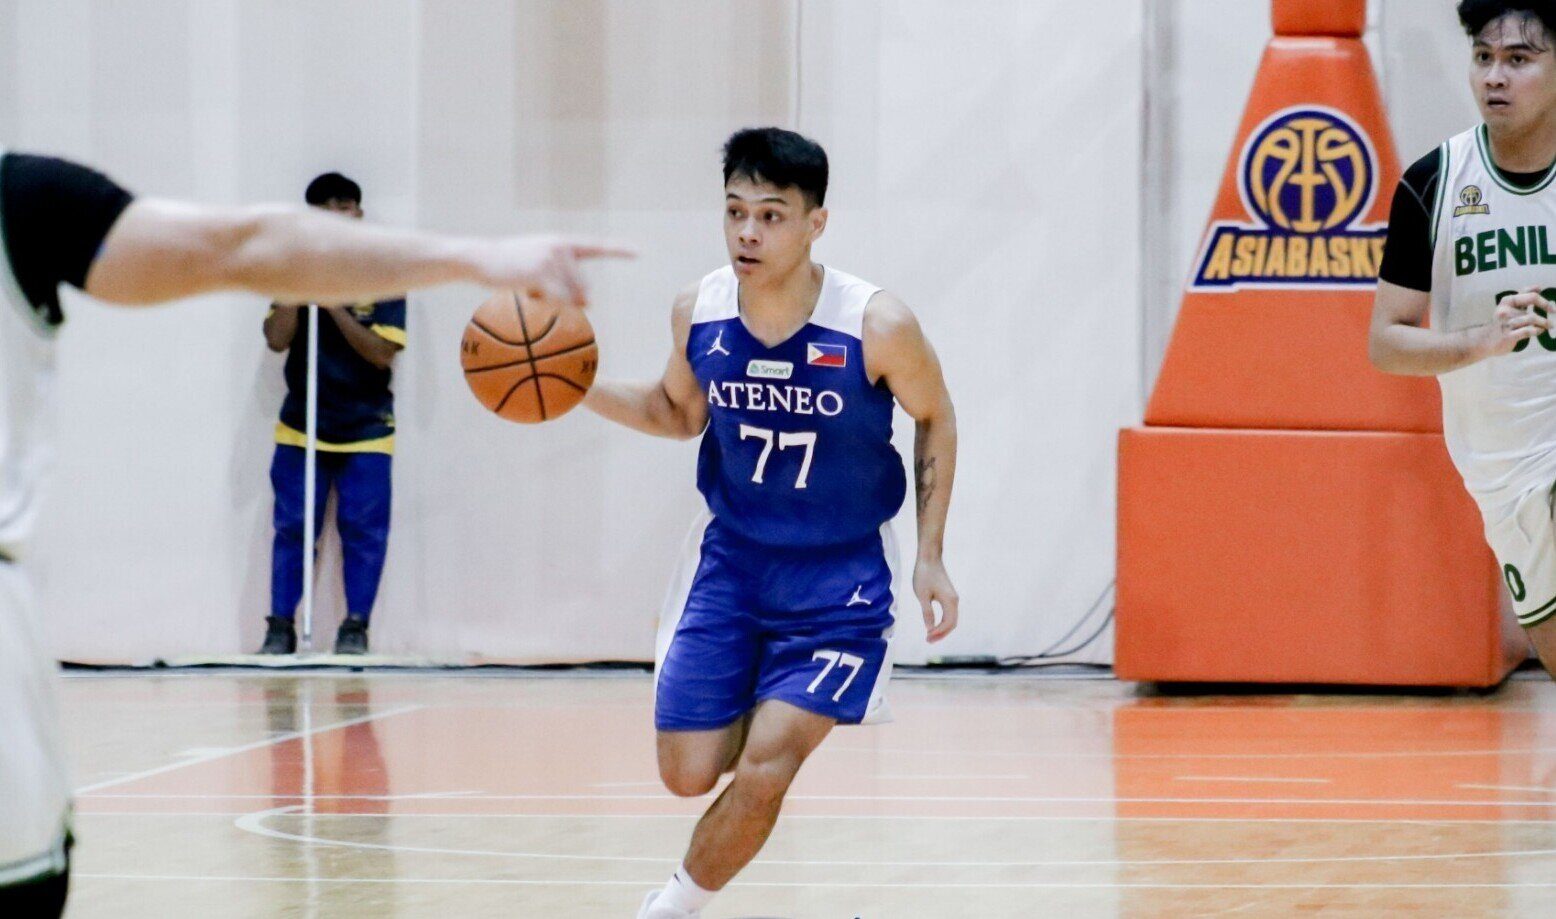 Ian Espinosa steps up as Ateneo survives CSB for AsiaBasket crown